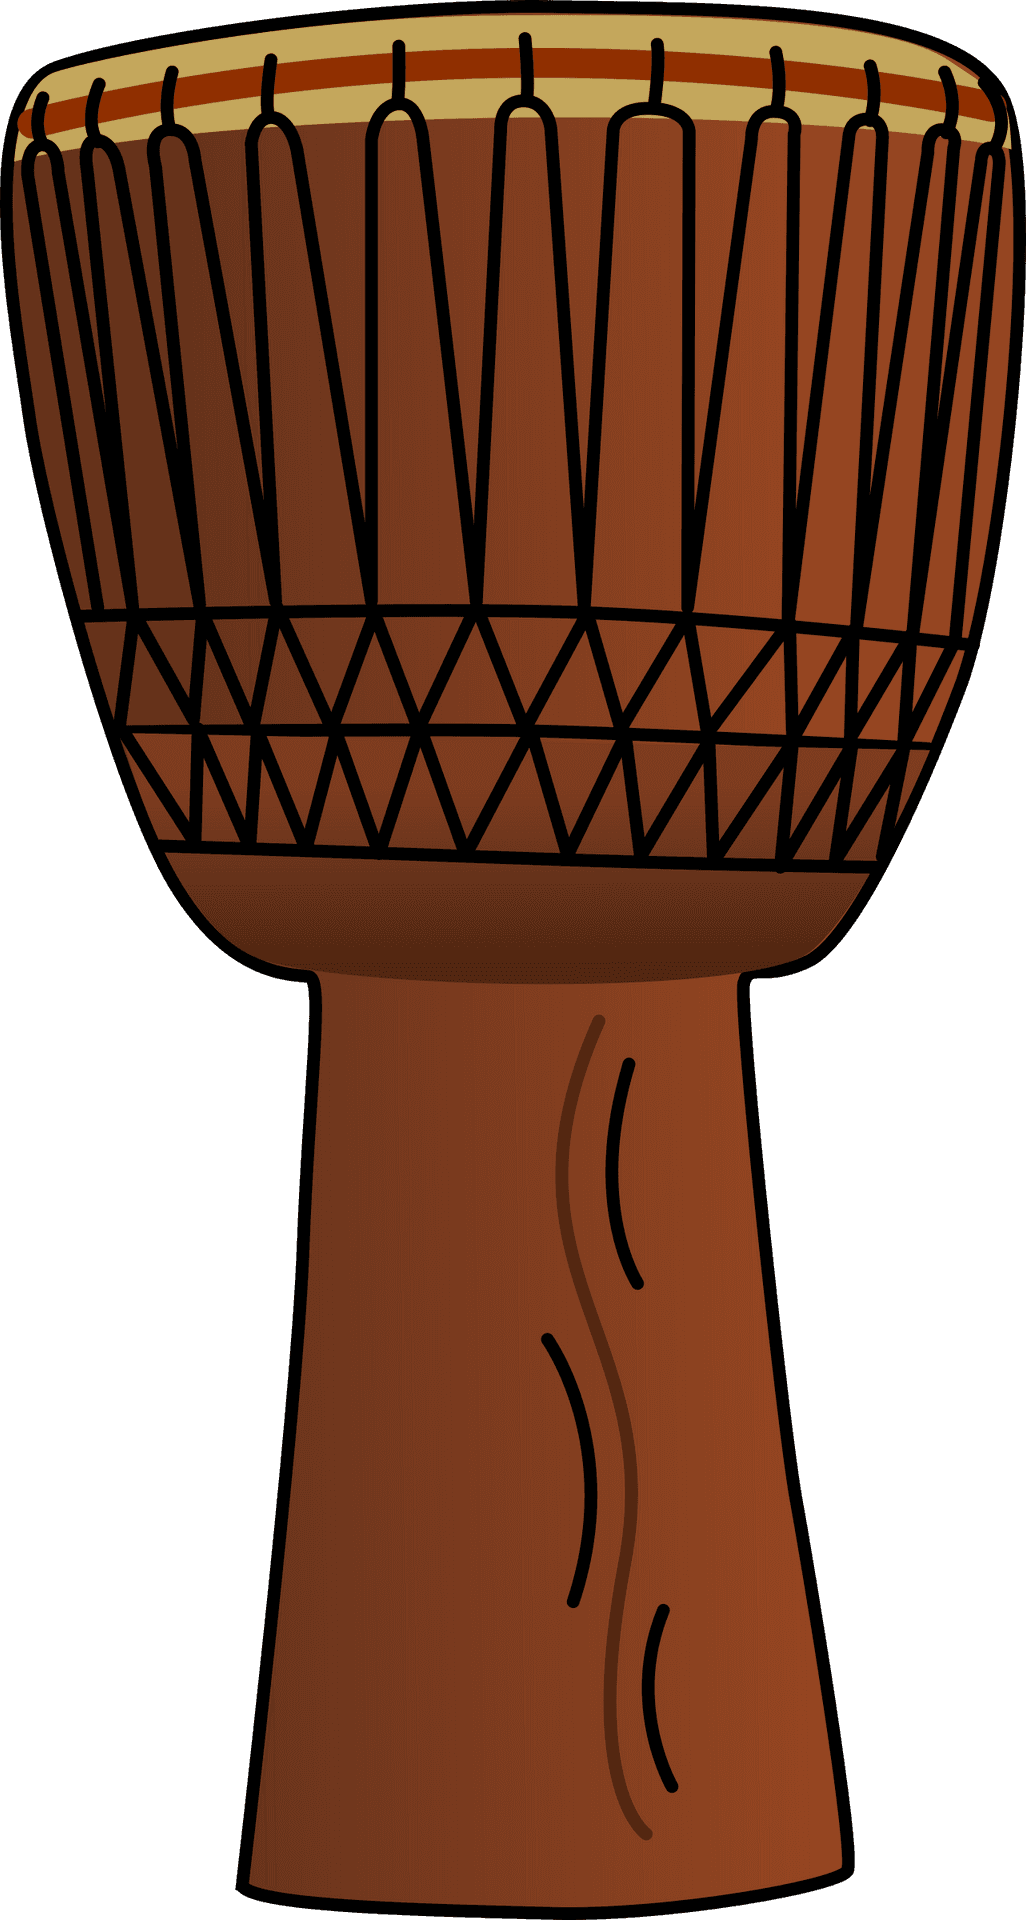 African Djembe Drum Illustration PNG image